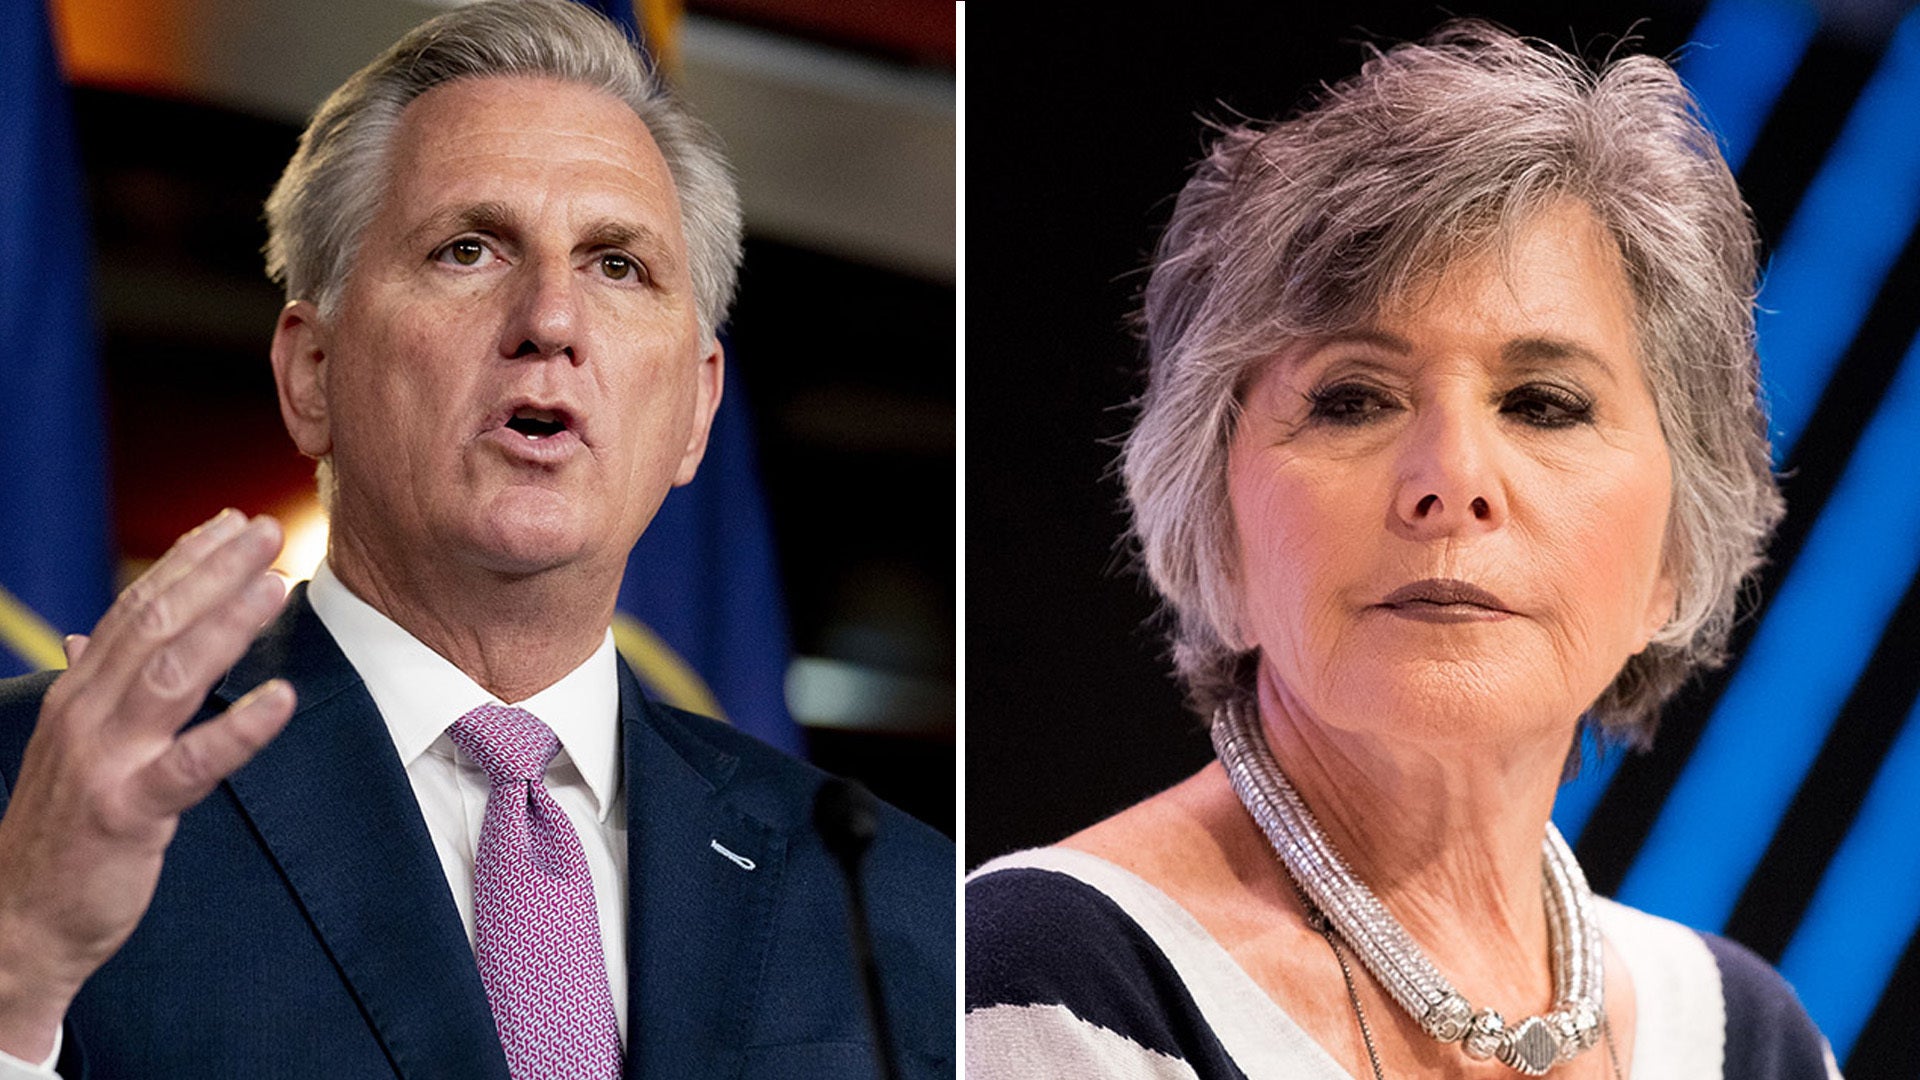 MSNBC slams McCarthy for joke about 'hitting' Pelosi with gavel after avoiding real-life Barbara Boxer assault